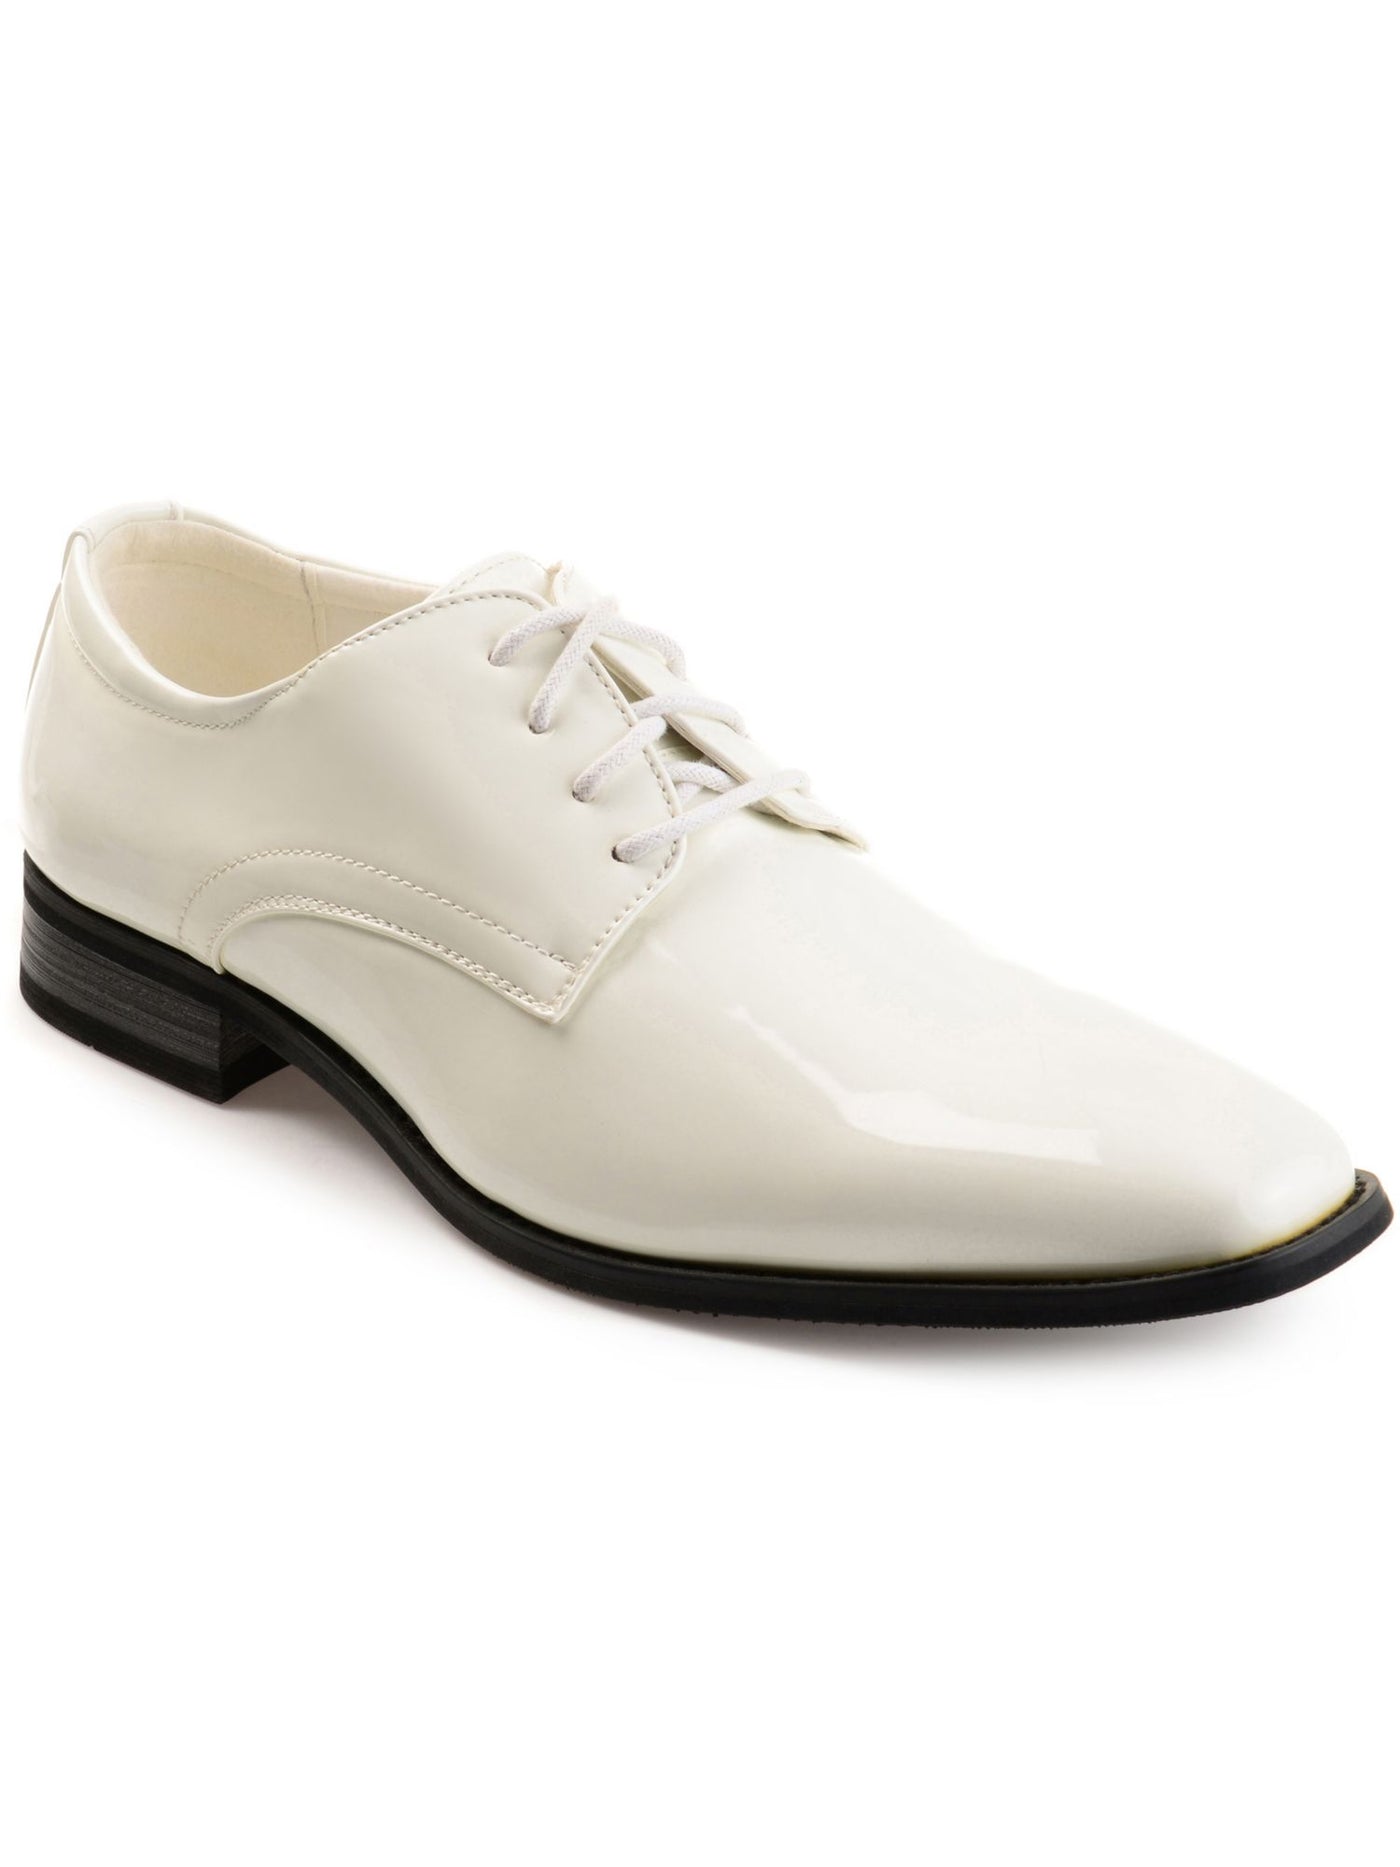 VANCE CO Mens White Padded Cole Square Toe Block Heel Lace-Up Dress Oxford Shoes 8